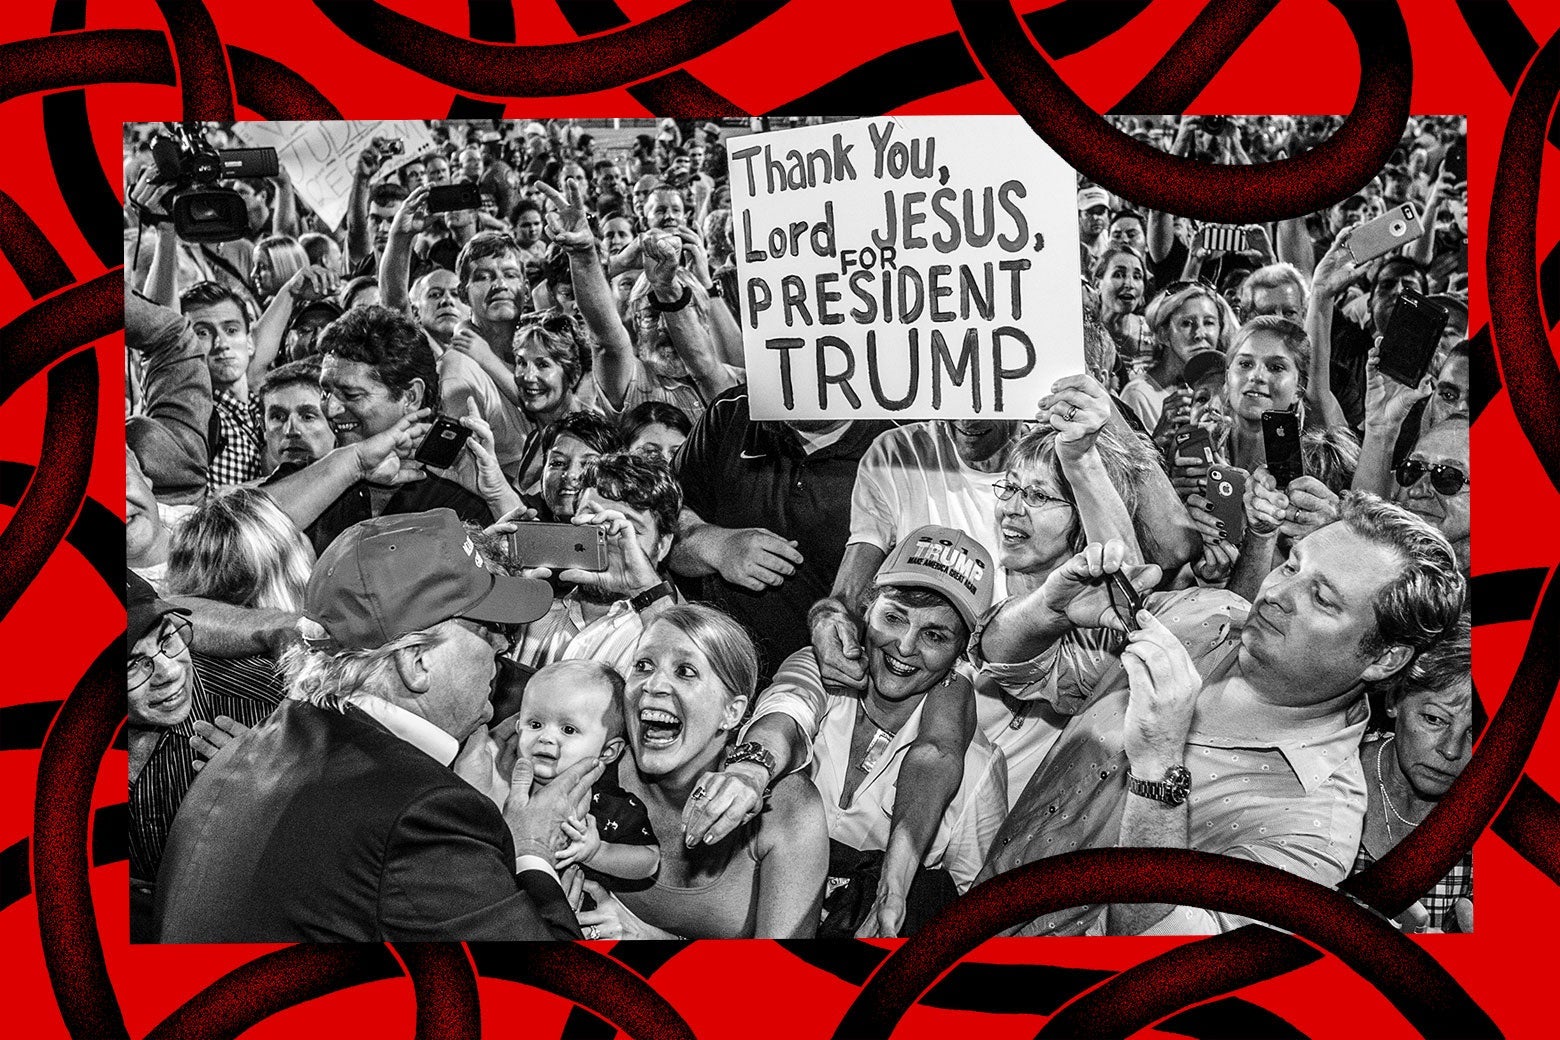 Trump greeting a jubilant crowd at a rally. One supporter holds up a sign that says "Thank you, Lord Jesus, for President Trump."